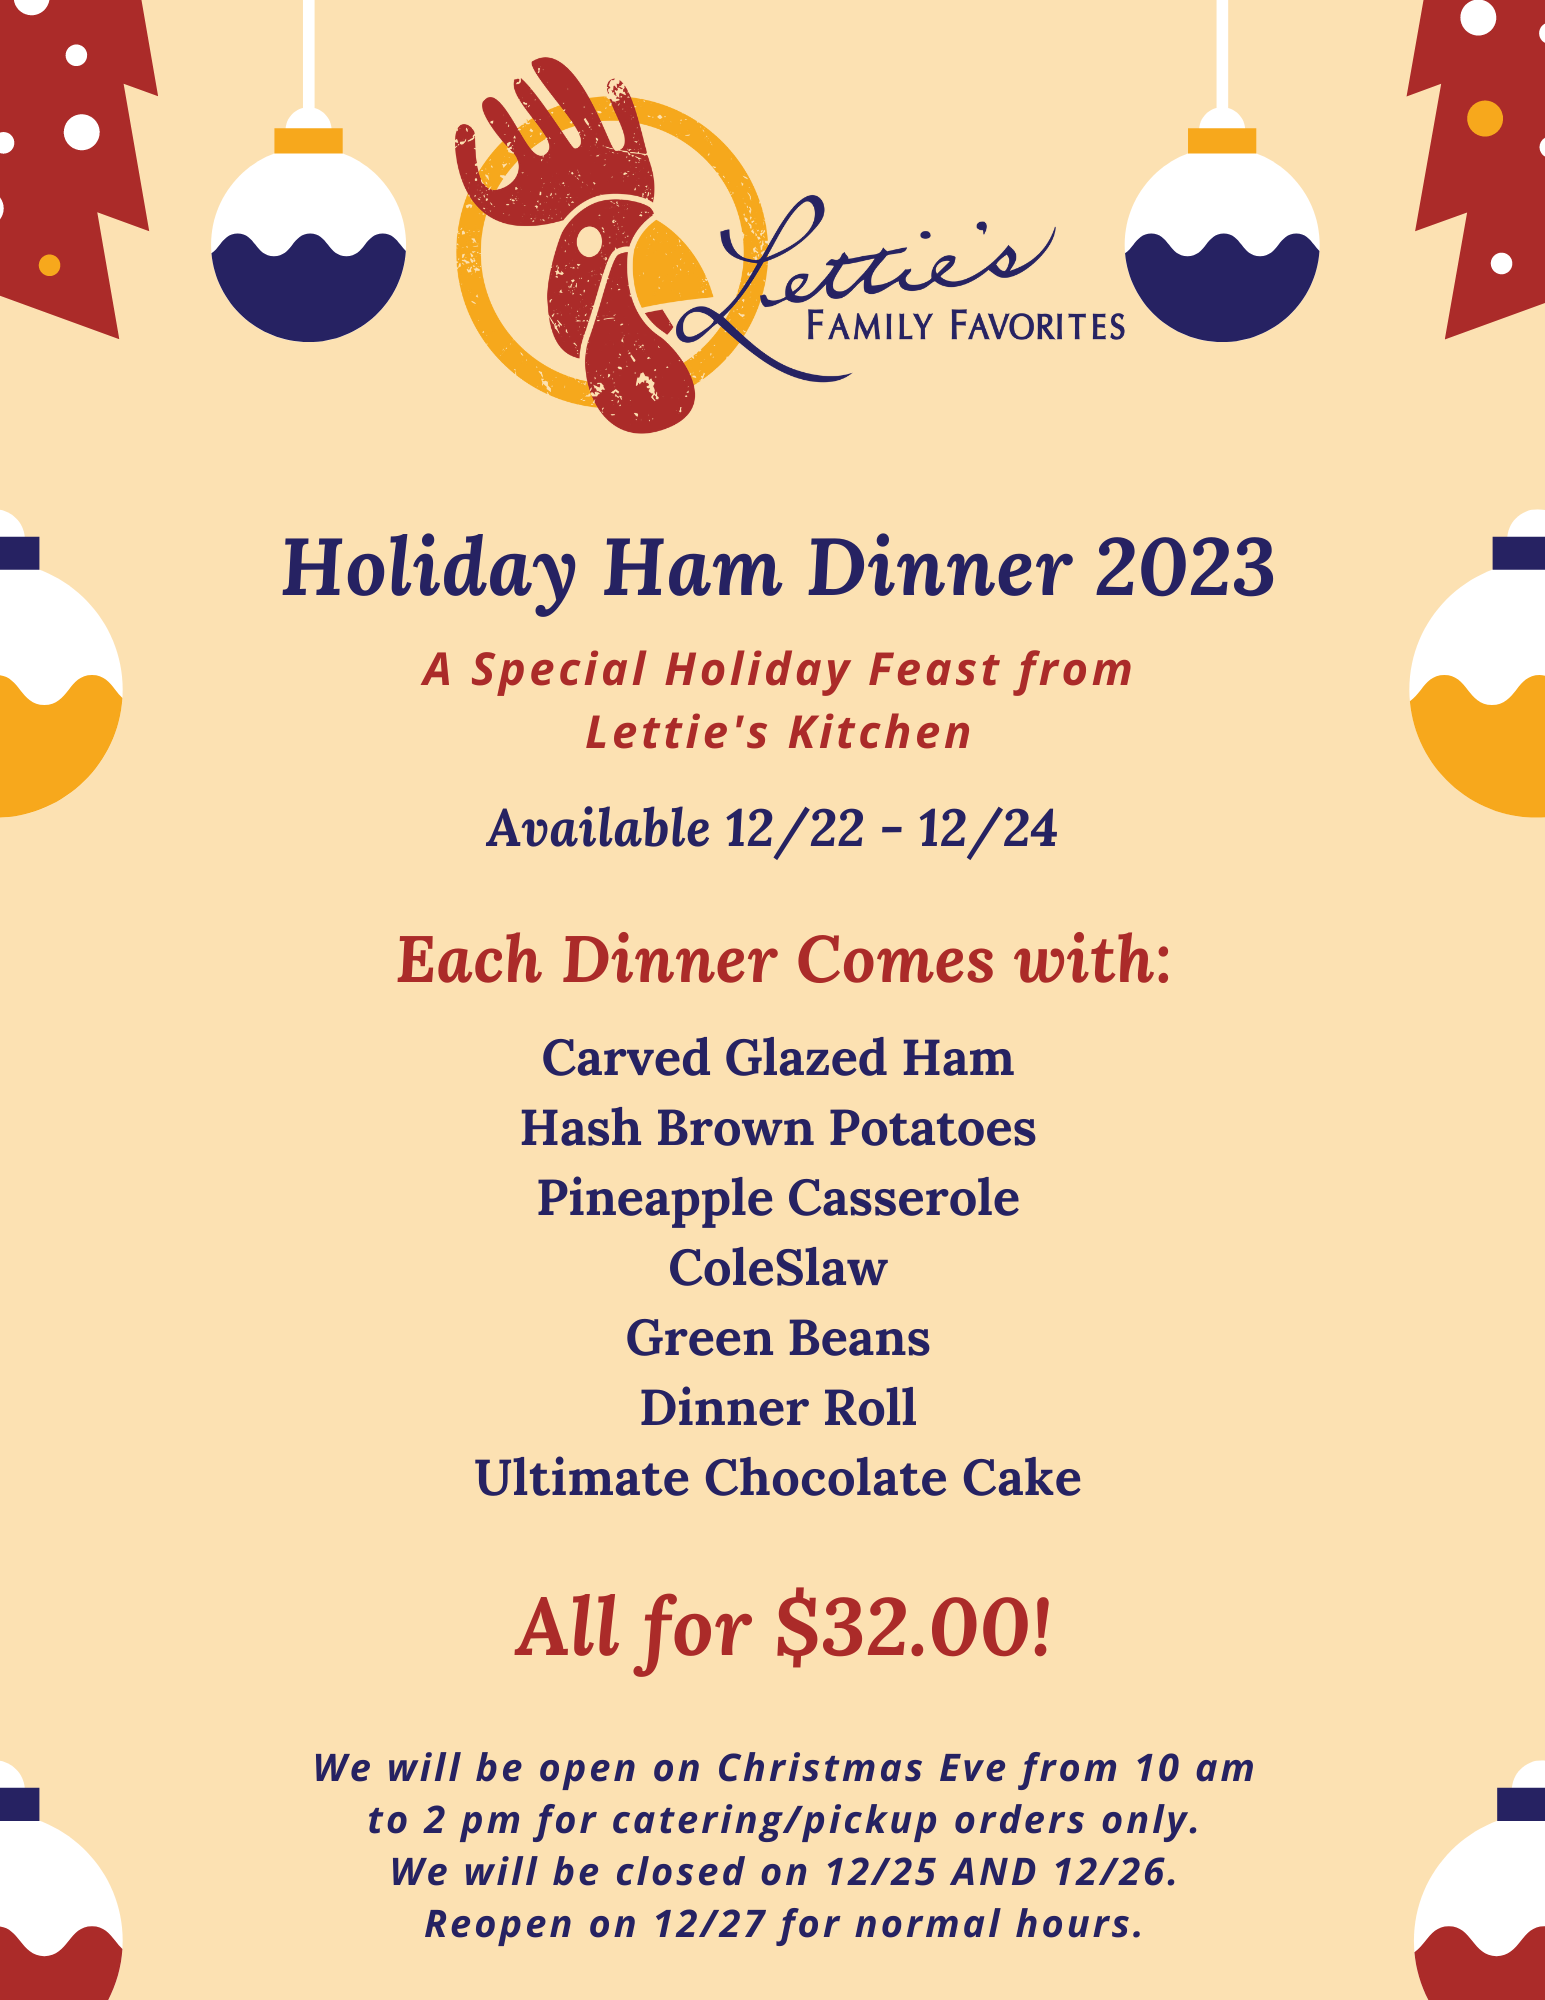 https://lettieskitchen.com/wp-content/uploads/2023/12/Holiday-Ham-Dinner-for-Letties-Kitchen-2023.png